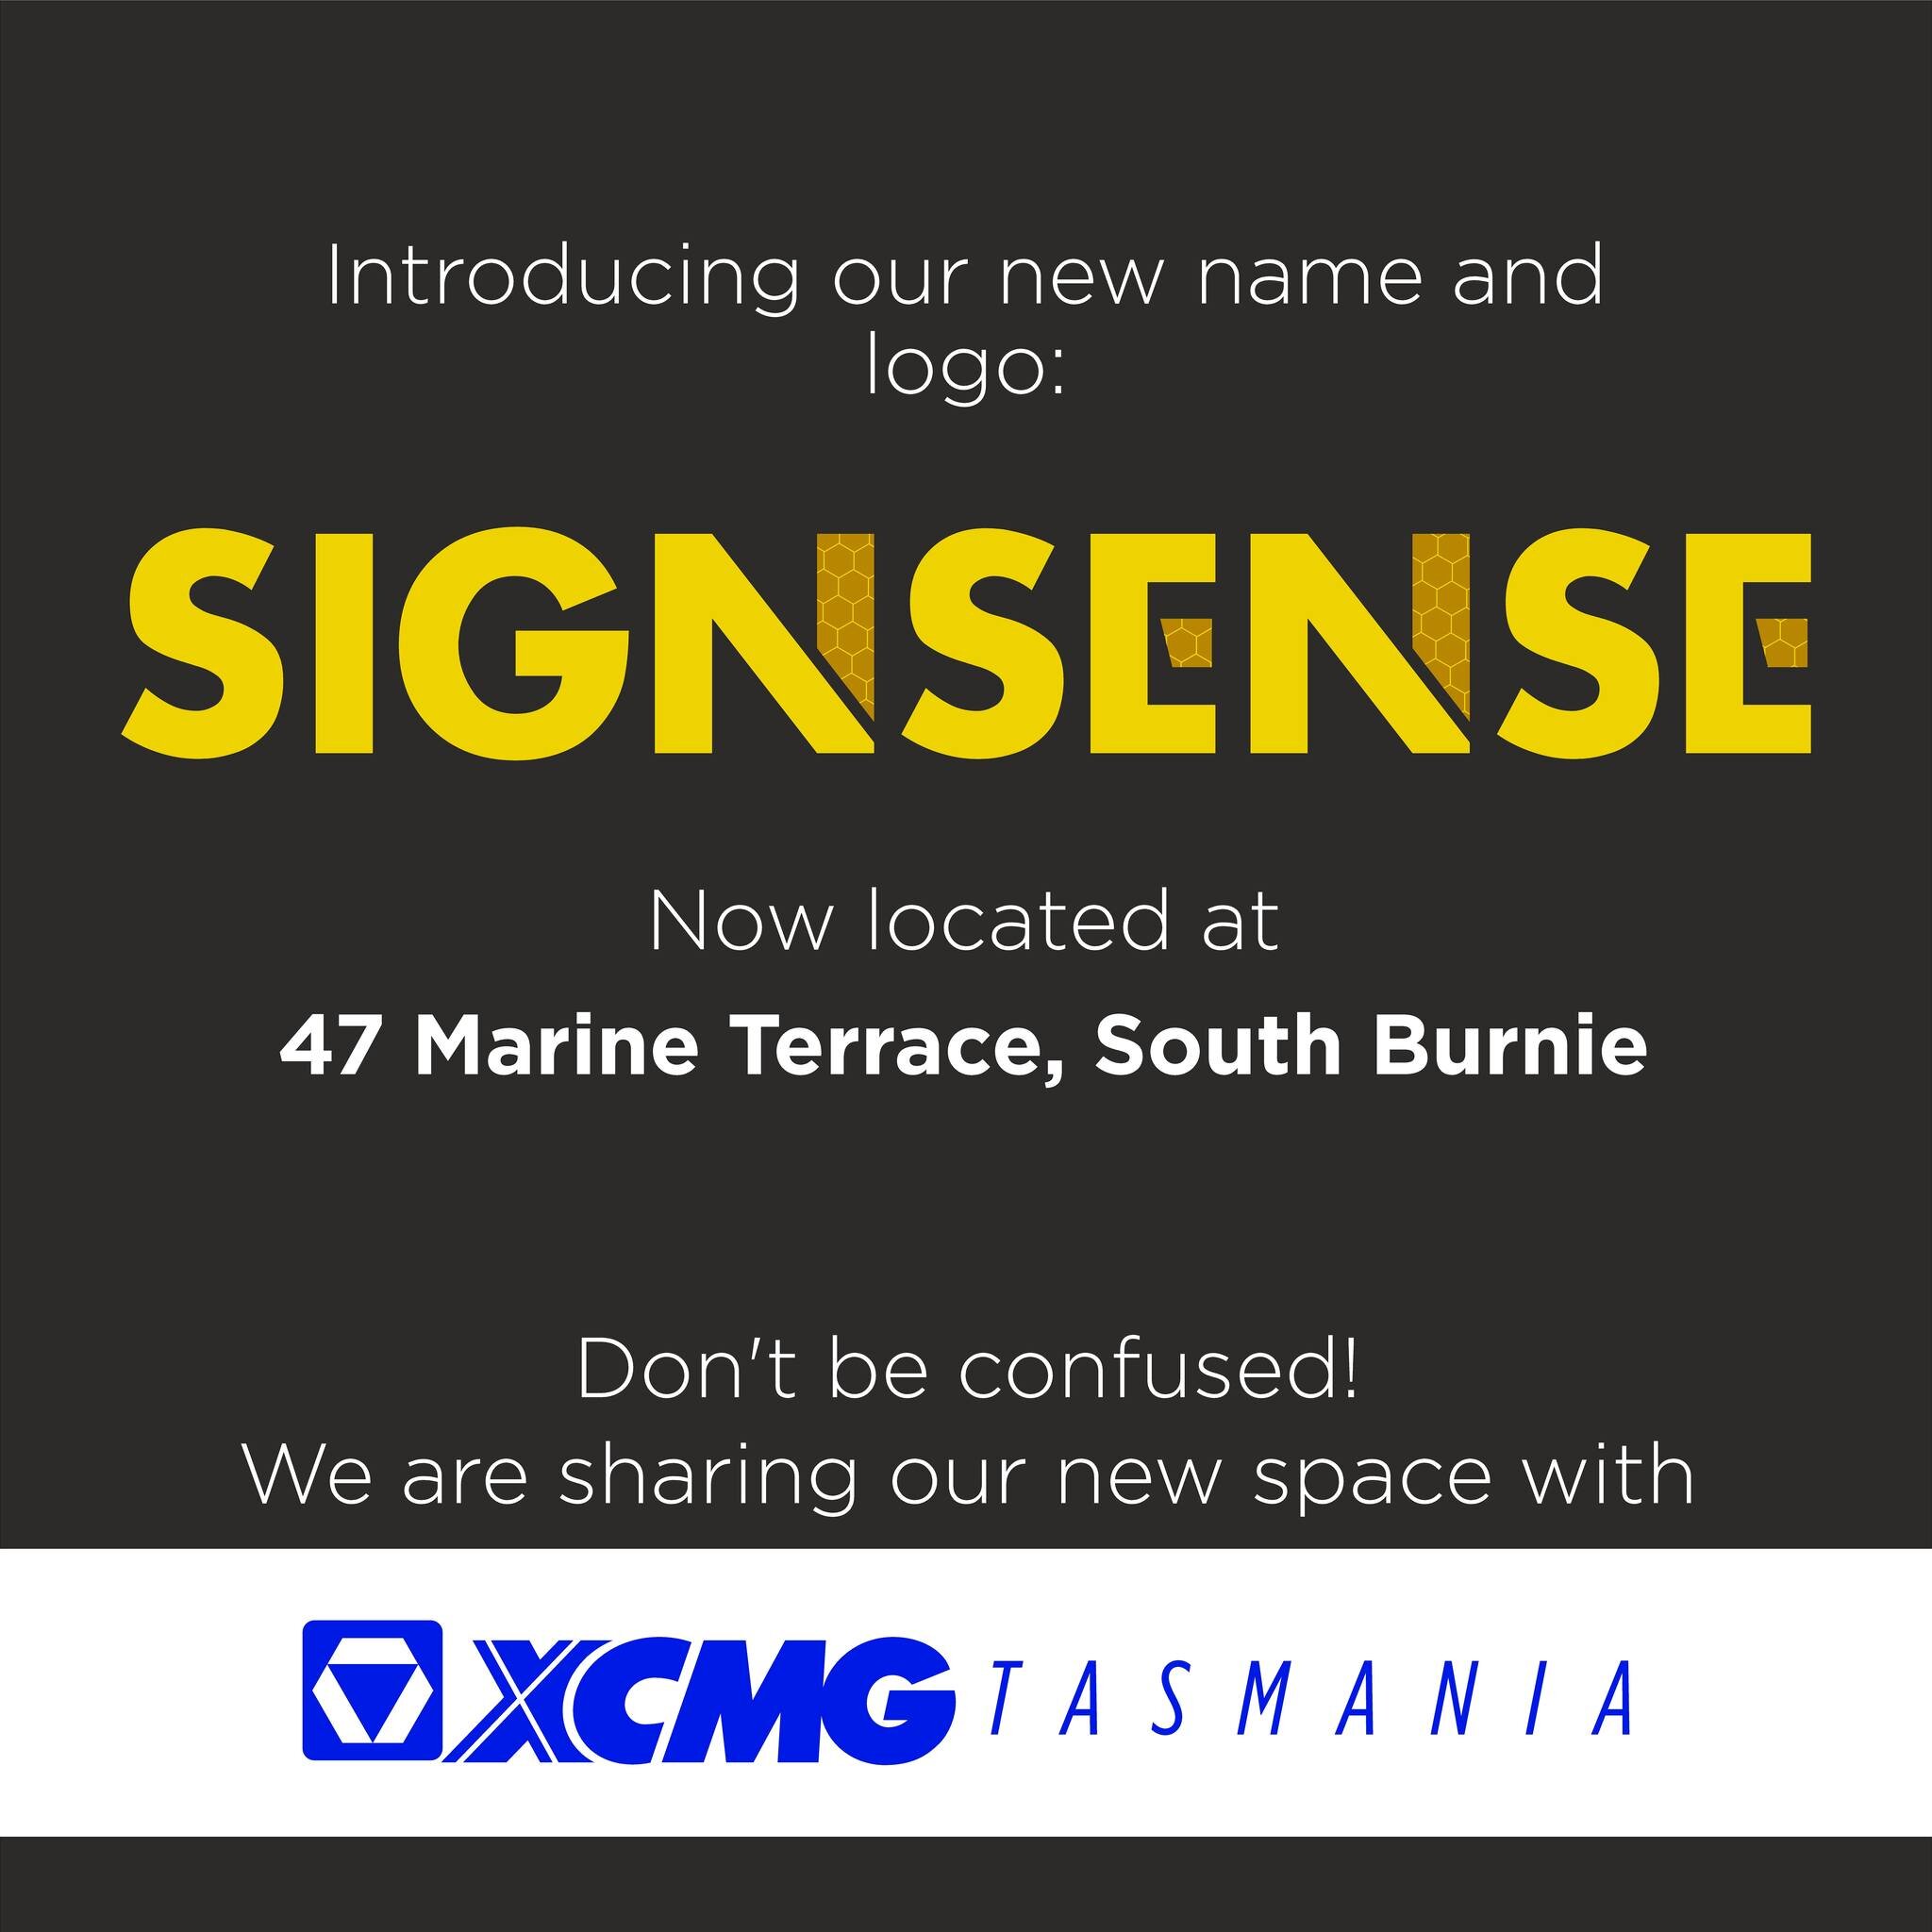 📣 Announcement!! We have undergone a bit of a rebrand and it's very exciting to introduce our new identity #signsense 

Even though we are in a new location, we are here for all of your signage needs.

🚧 Construction site signs 
🛑 Reflective Safet